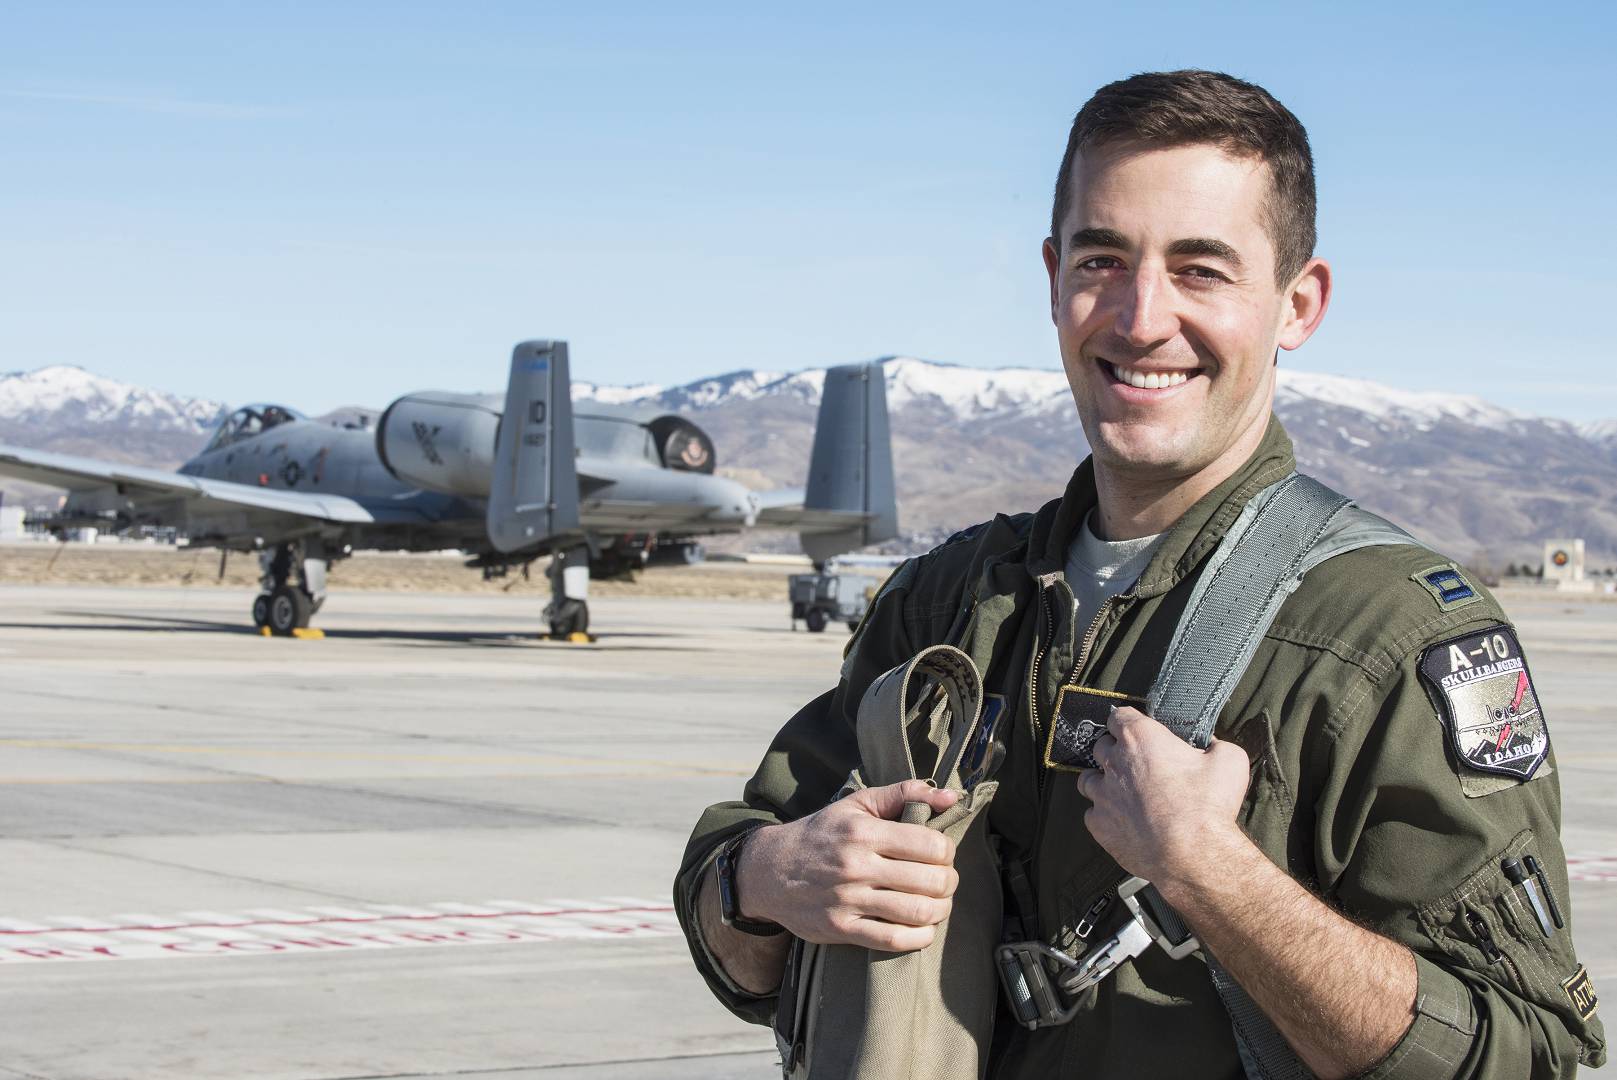 Spend a day flying with Capt. Mike Shufeldt, one of the Idaho National Guard’s A-10 Thunderbolt II pilots, and feel firsthand what it is like to be an A-10 fighter pilot. Photo by Master Sgt. Becky Vanshur